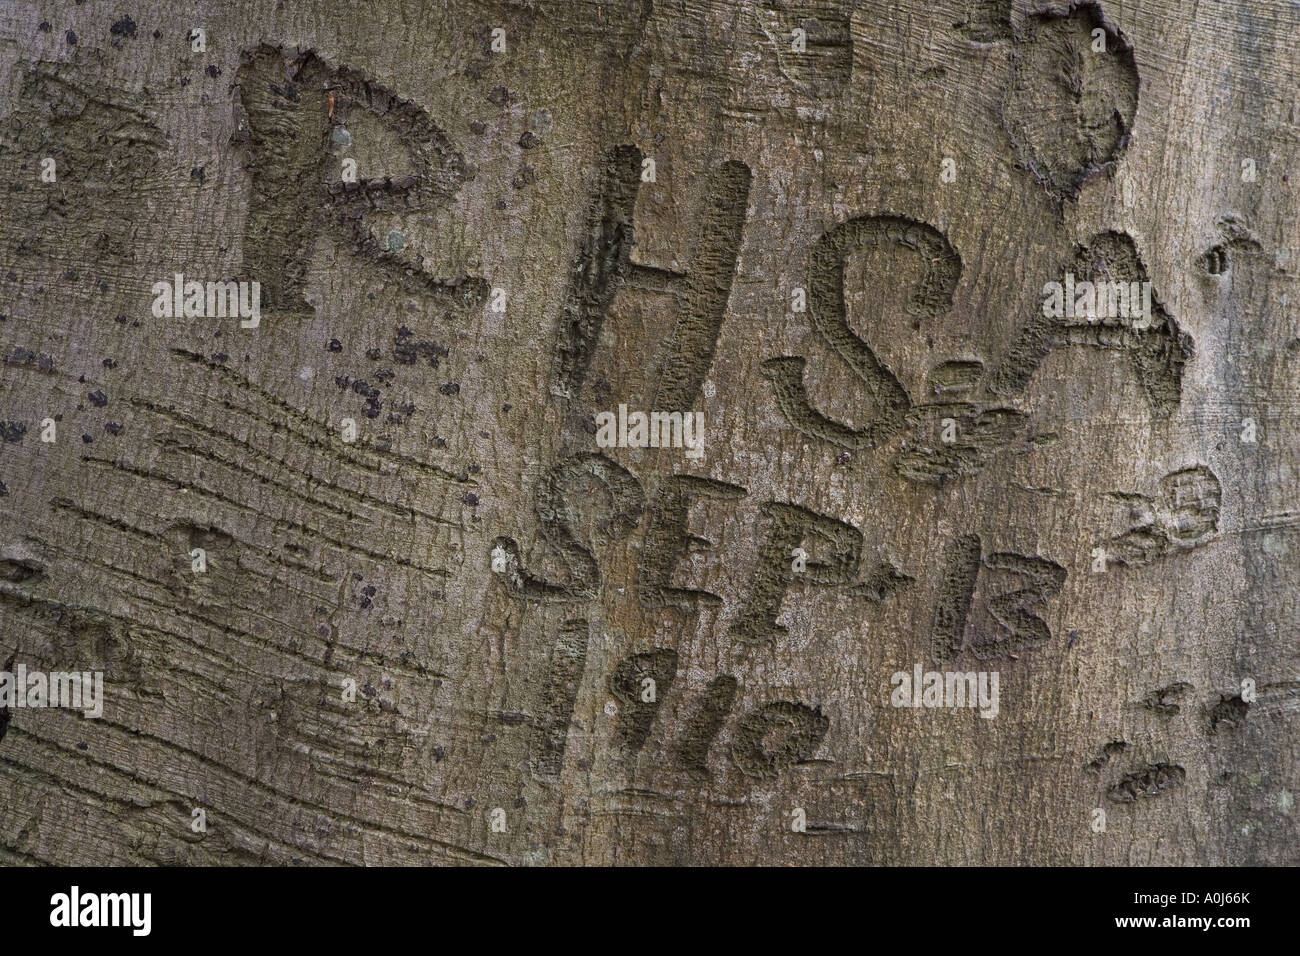 Beech tree with ancient carving from 1910 on the bark Felbrigg Norfolk UK Stock Photo